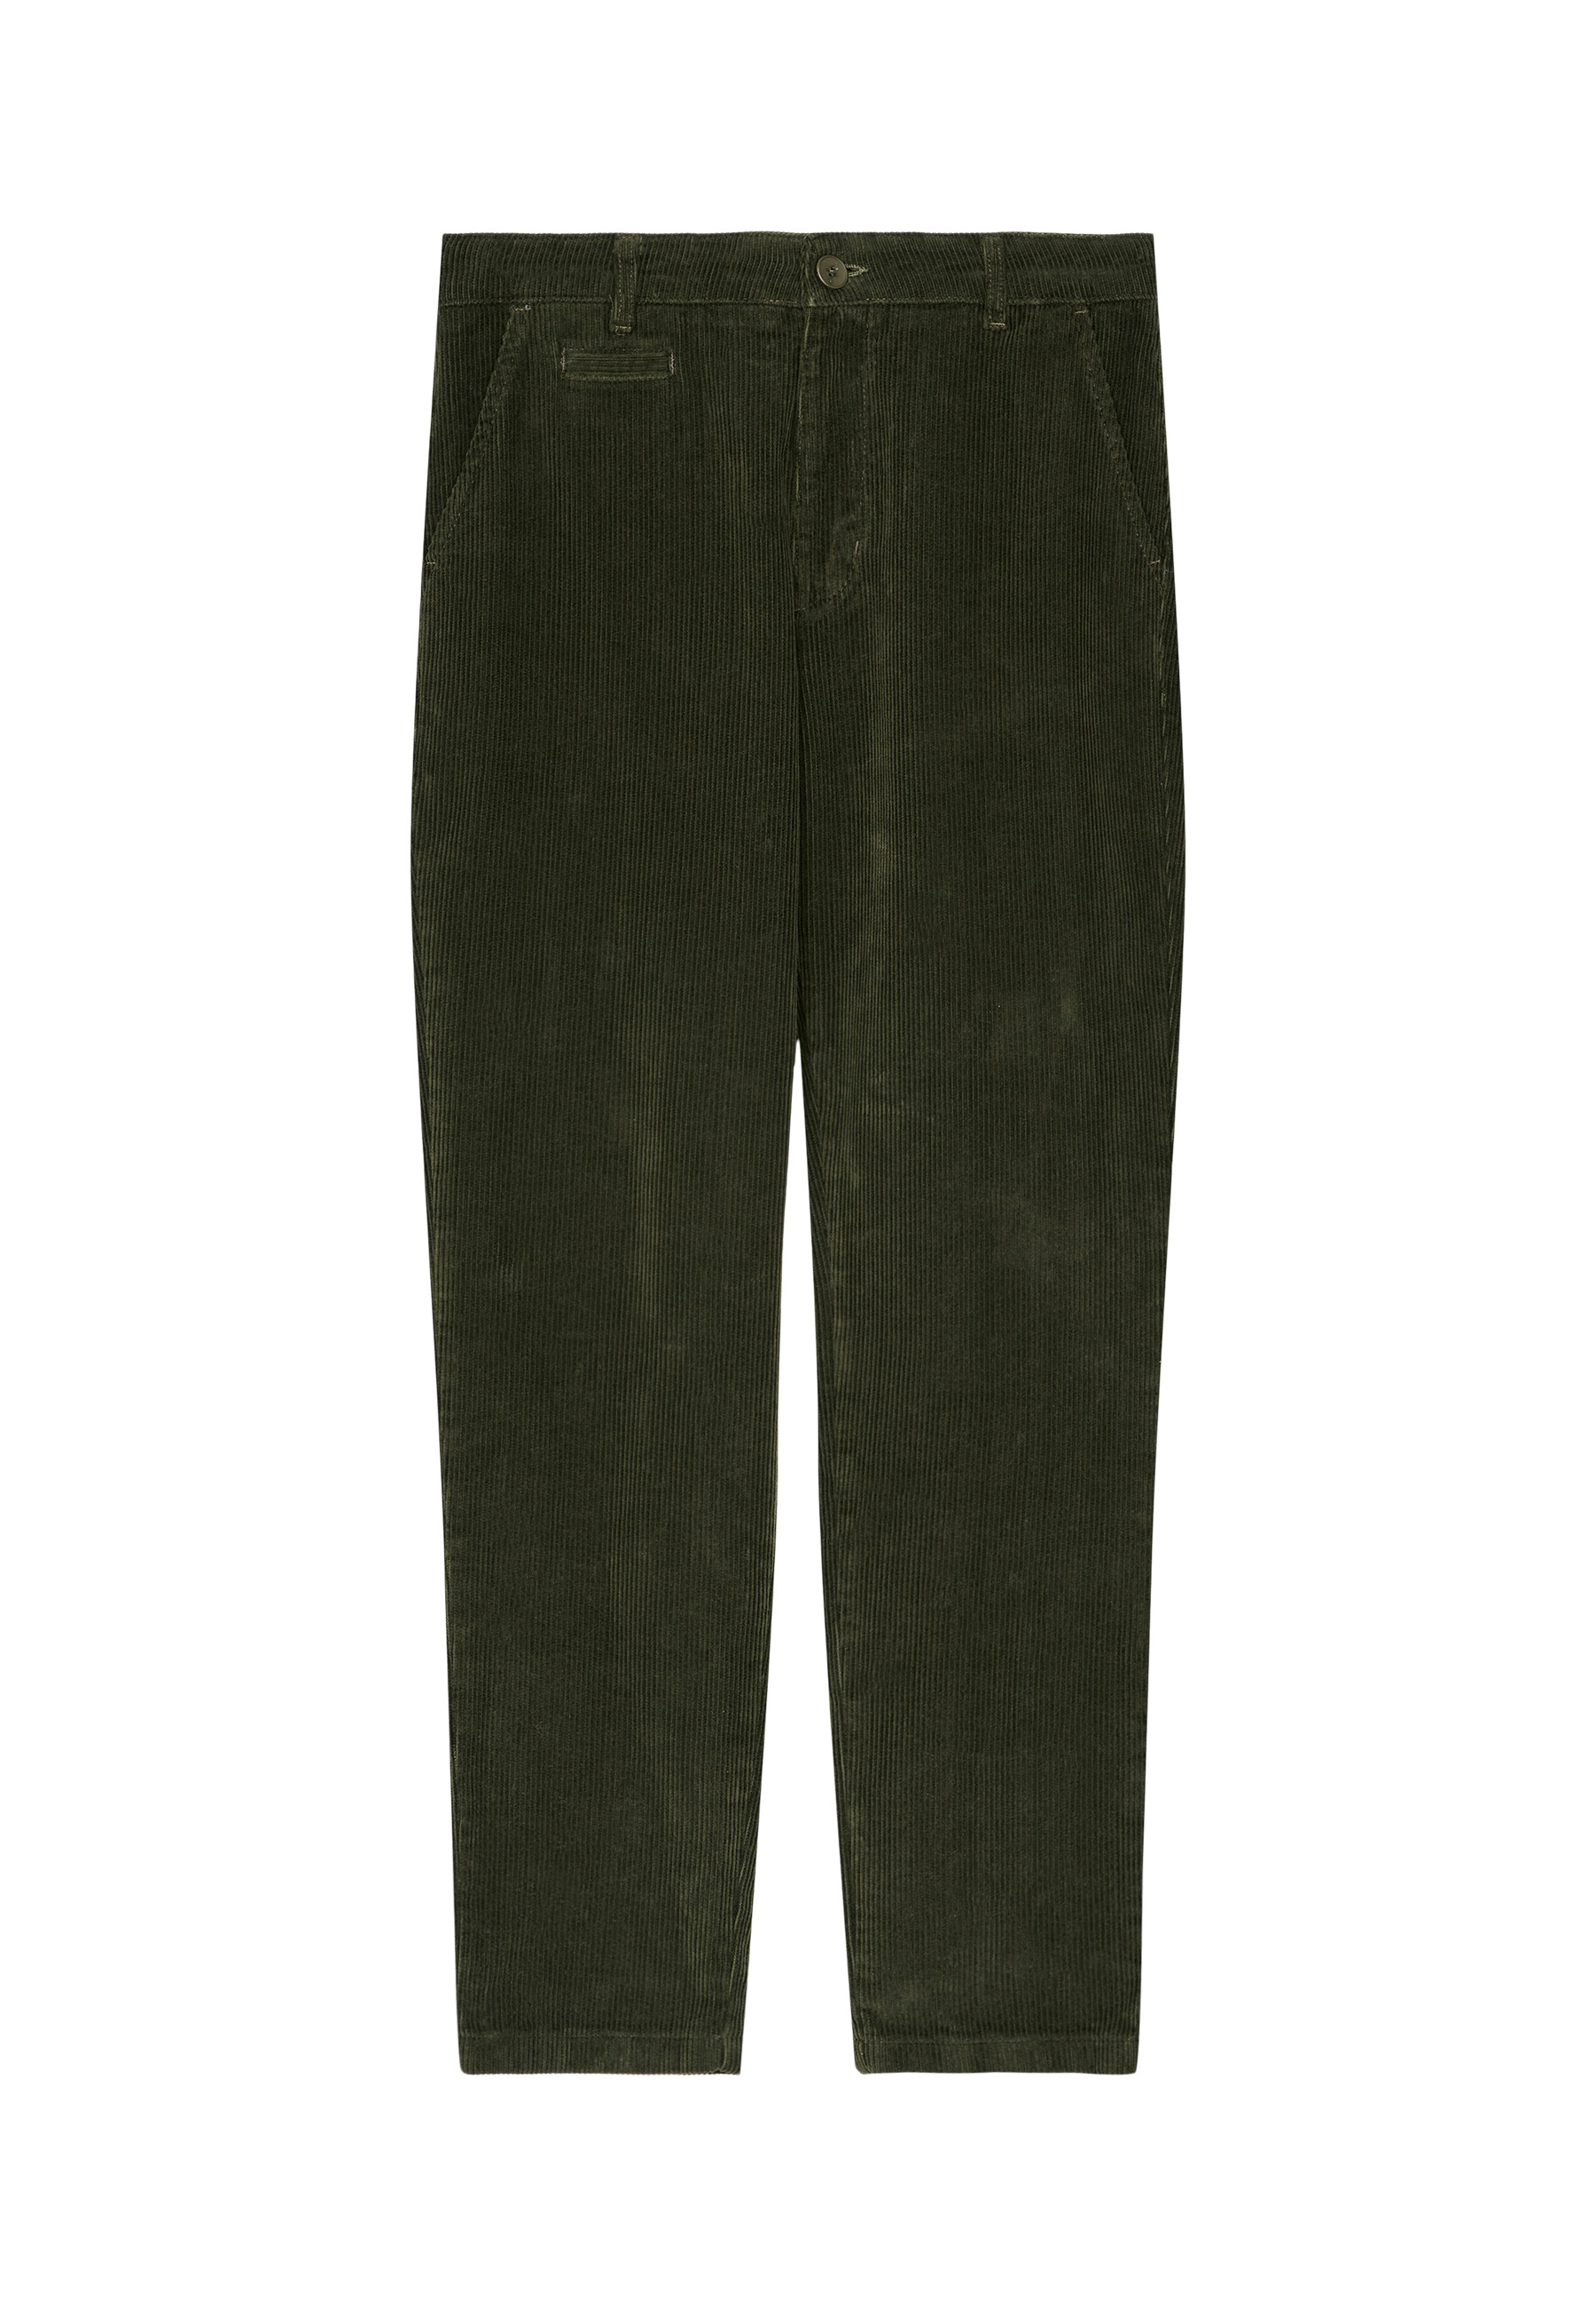 Knowledge Cotton Apparel  70303 Regular 8 Wales Corduroy Pant Forrest Night